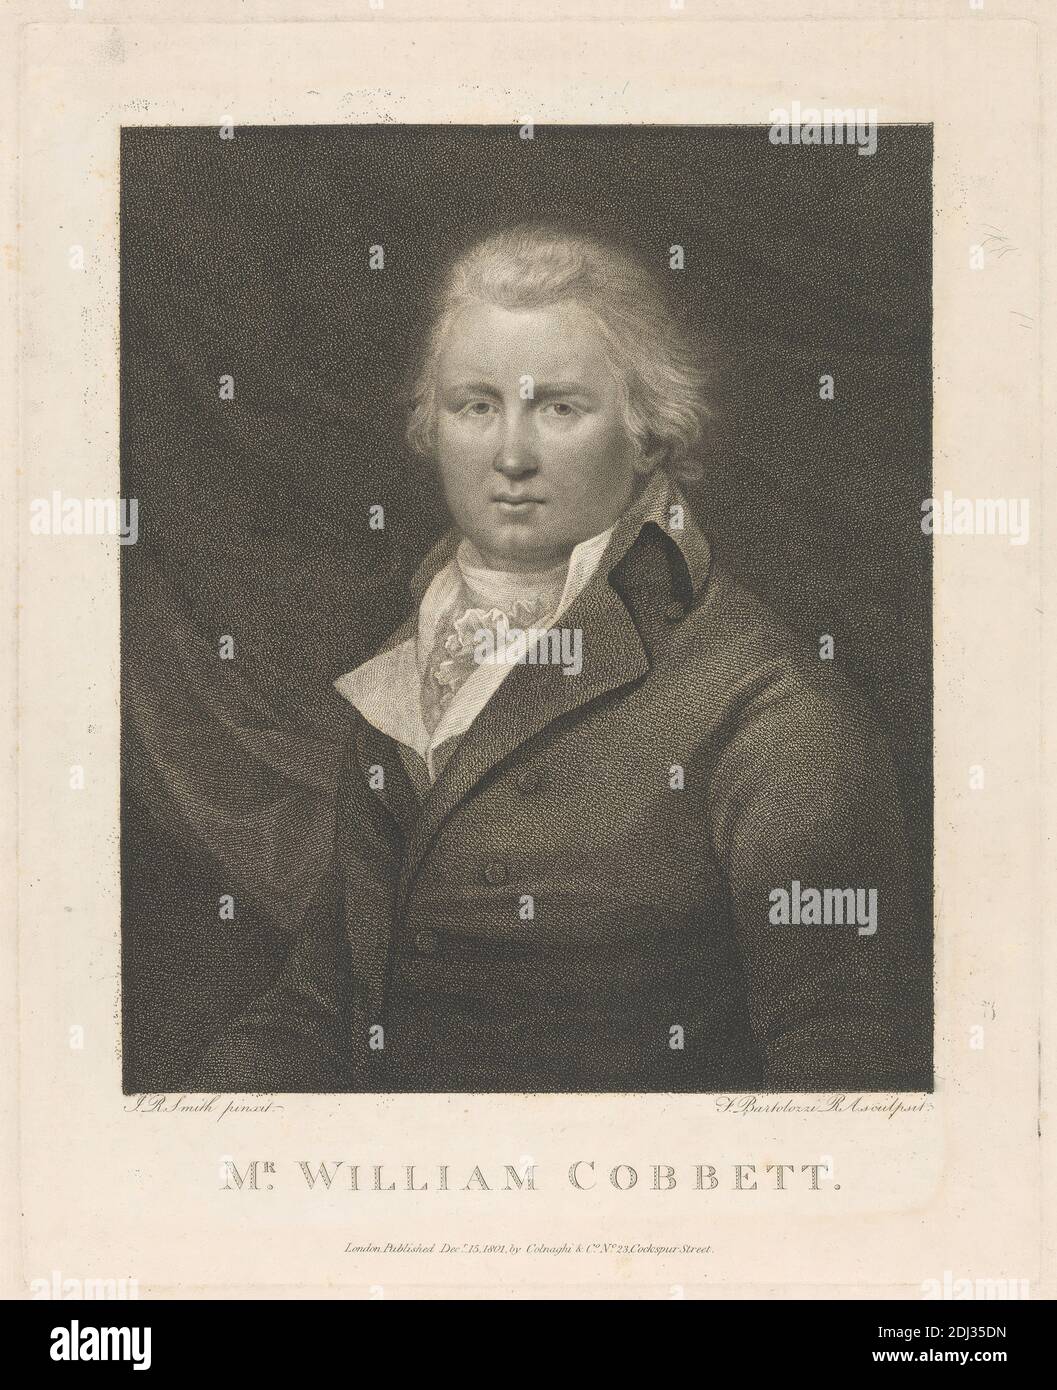 William Cobbett, Print made by Francesco Bartolozzi RA, 1728–1815, Italian, active in Britain (1764–99), after John Raphael Smith, 1752–1812, British, Published by Colnaghi & Co., established 1760, active ca. 1785–1911, Italian, active in Britain, 1801, Etching and stipple engraving on moderately thick, moderately textured, cream wove paper, Sheet: 16 15/16 x 12 9/16 inches (43.1 x 31.9 cm), Plate: 12 7/8 x 10 5/16 inches (32.7 x 26.2 cm), and Image: 9 13/16 x 8 1/4 inches (25 x 21 cm), coat, collar, costume, cravat, drapery, man, portrait, ruffle, writer Stock Photo